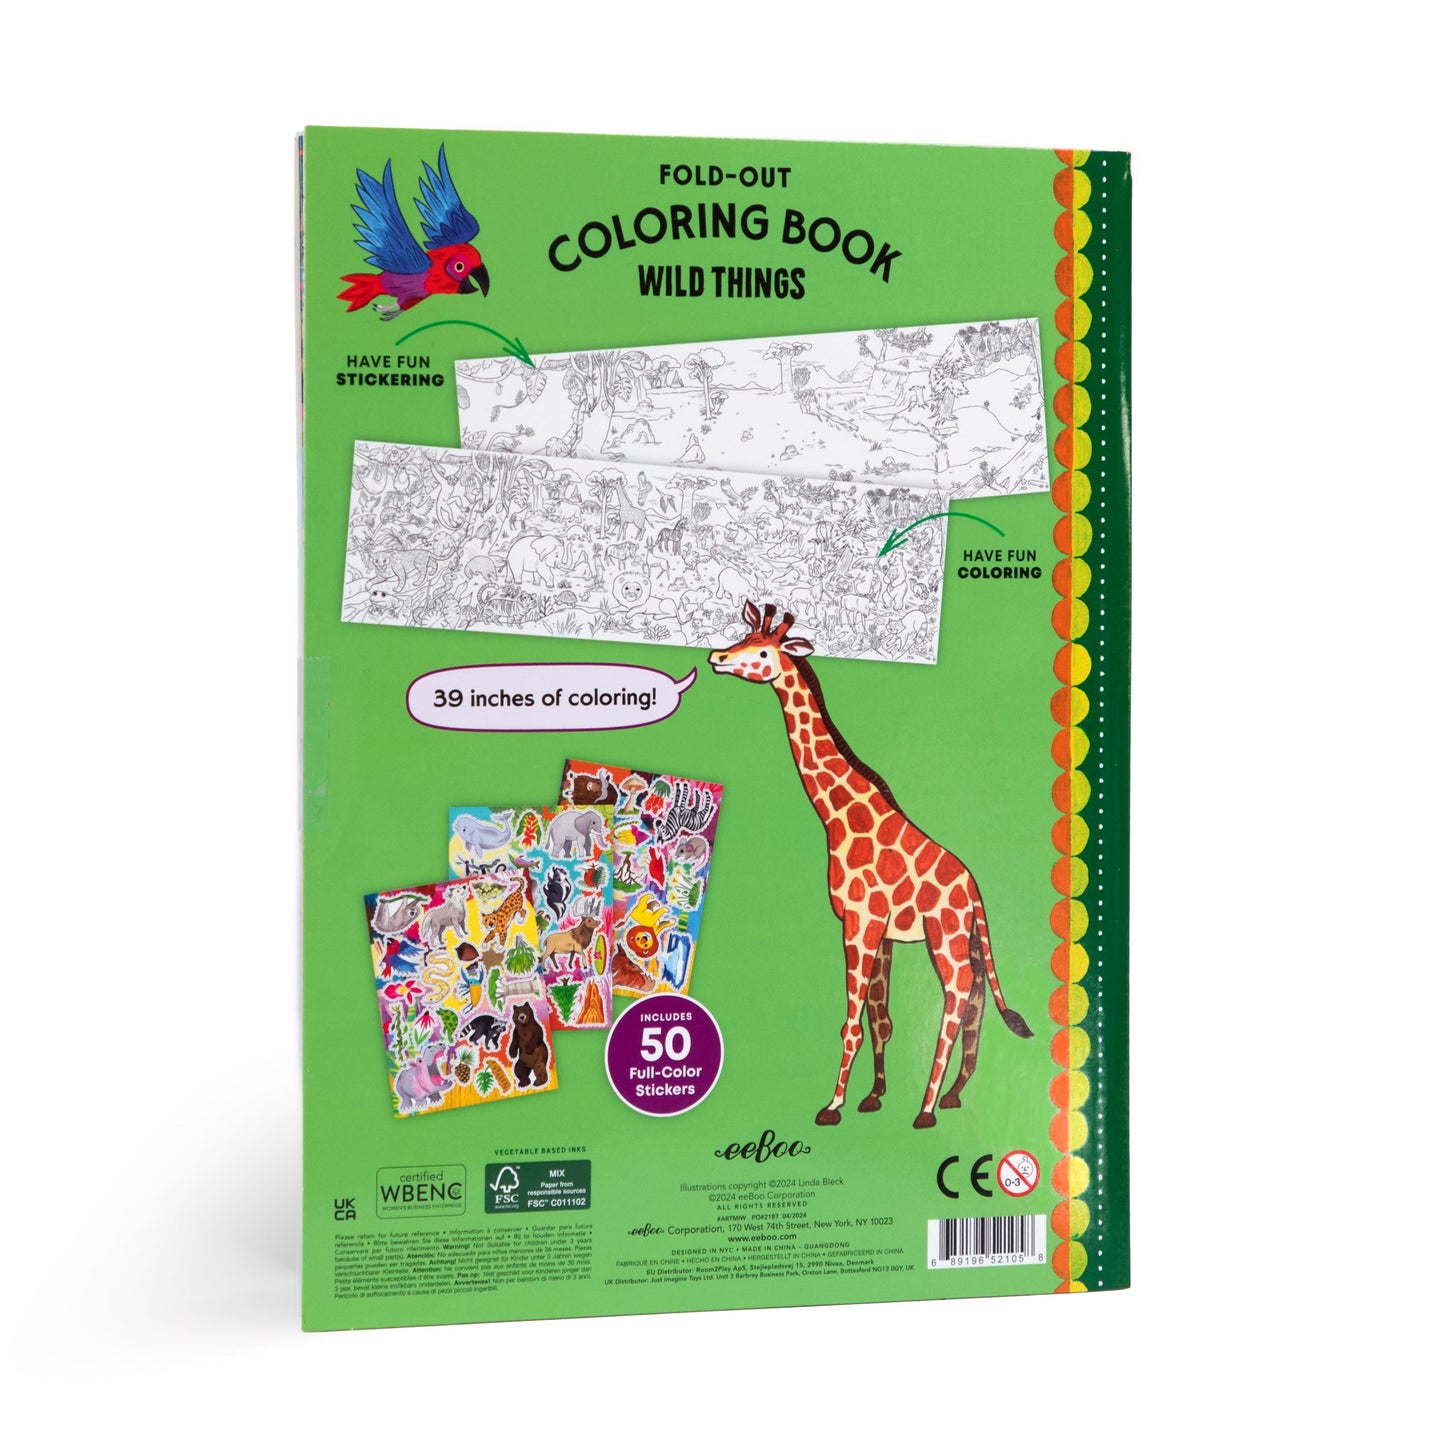 Fold-Out Coloring Book - Wild Things by eeBoo | Unique Fun Gifts